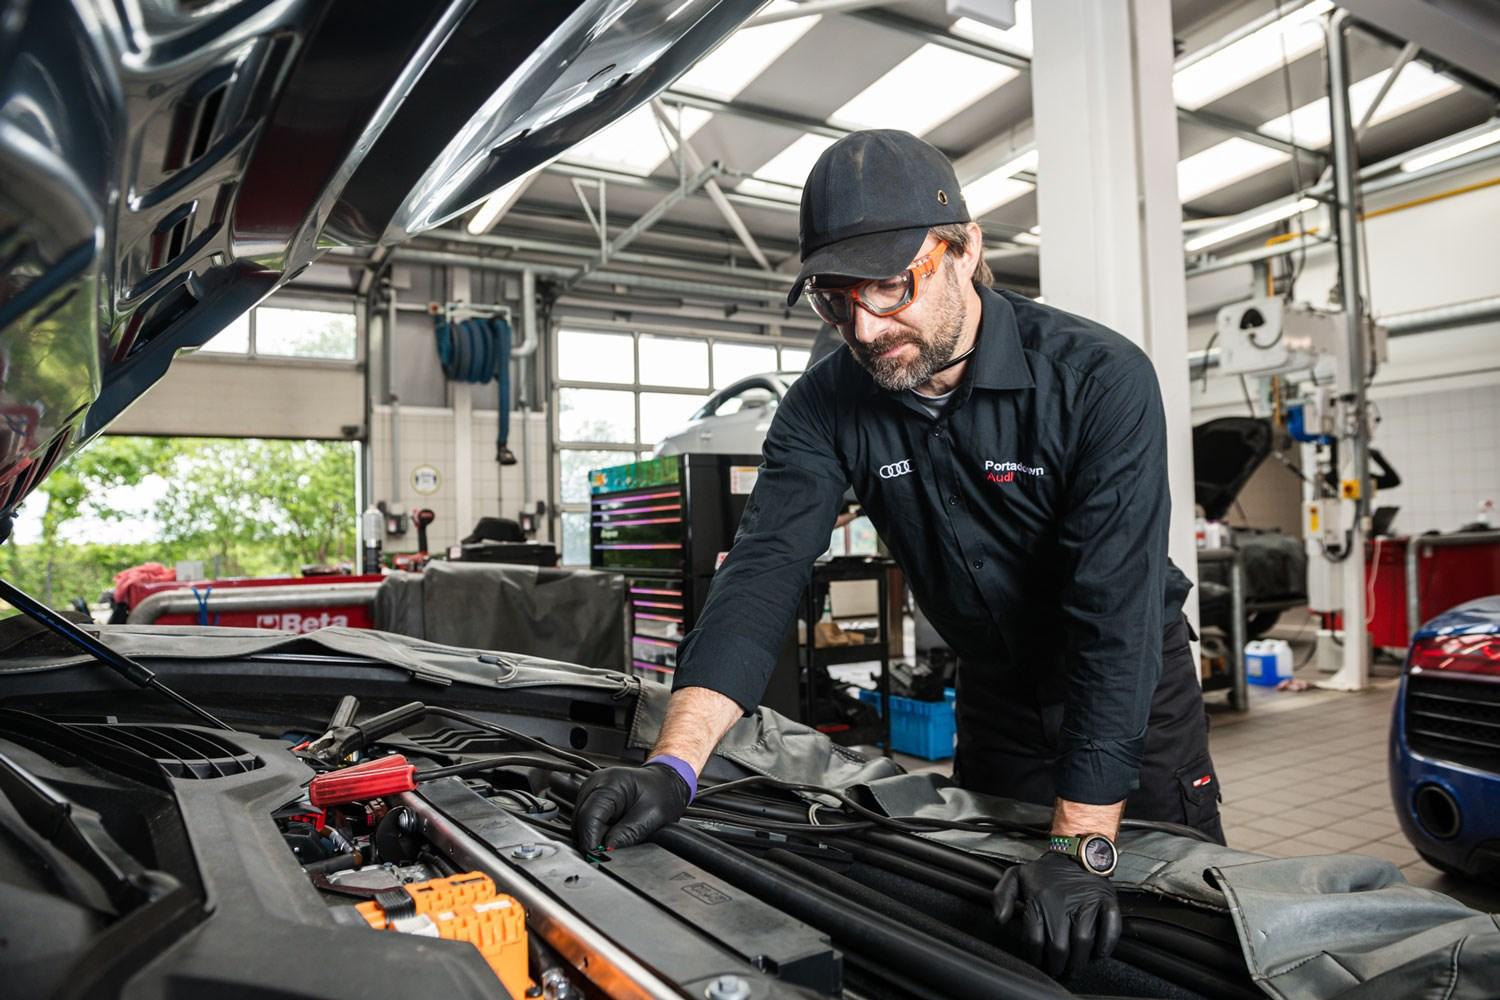 Audi Repair Specialist checks the battery of an Audi vehicle during routine maintenance at Portadown Audi